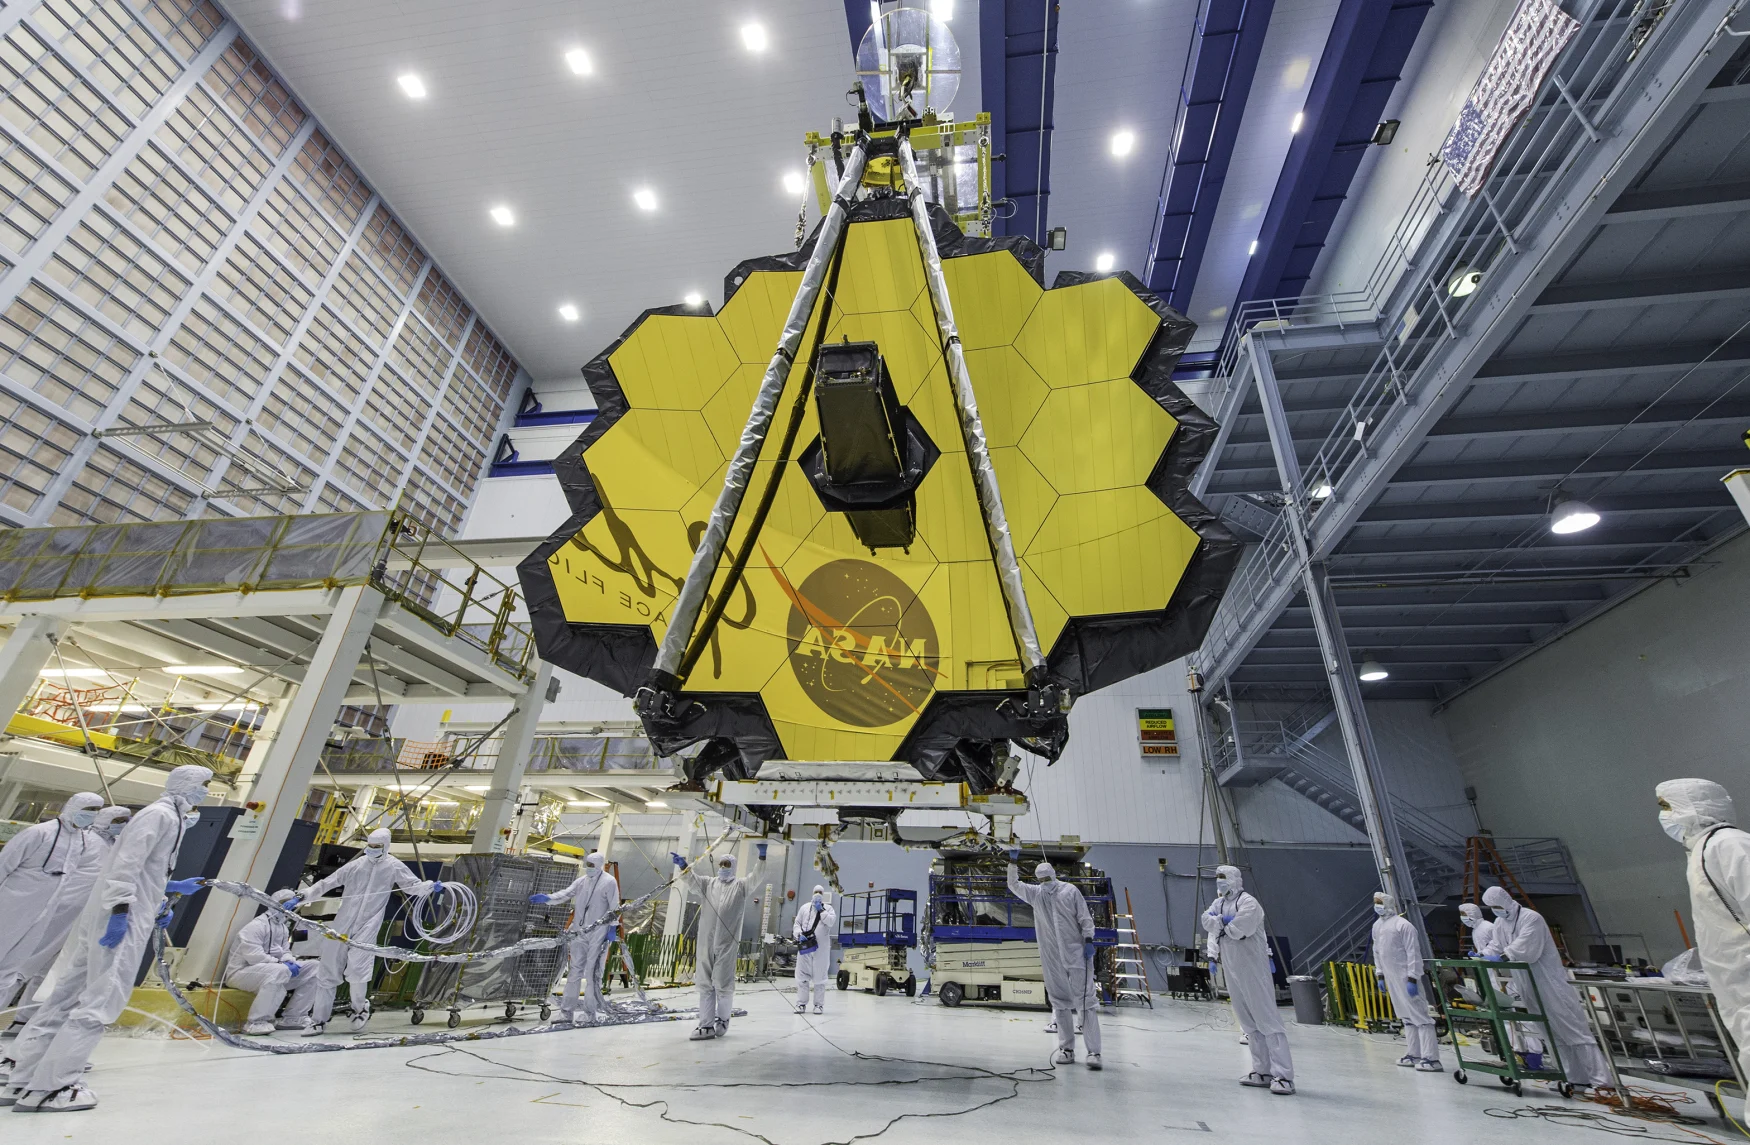 FILE - In this April 13, 2017 file photo provided by NASA, technicians lift the mirror of the James Webb Space Telescope using a crane at the Goddard Space Flight Center in Greenbelt, Md. The telescope's 18-segmented gold mirror is specially designed to capture infrared light from the first galaxies that formed in the early universe. (Laura Betz/NASA via AP, File)